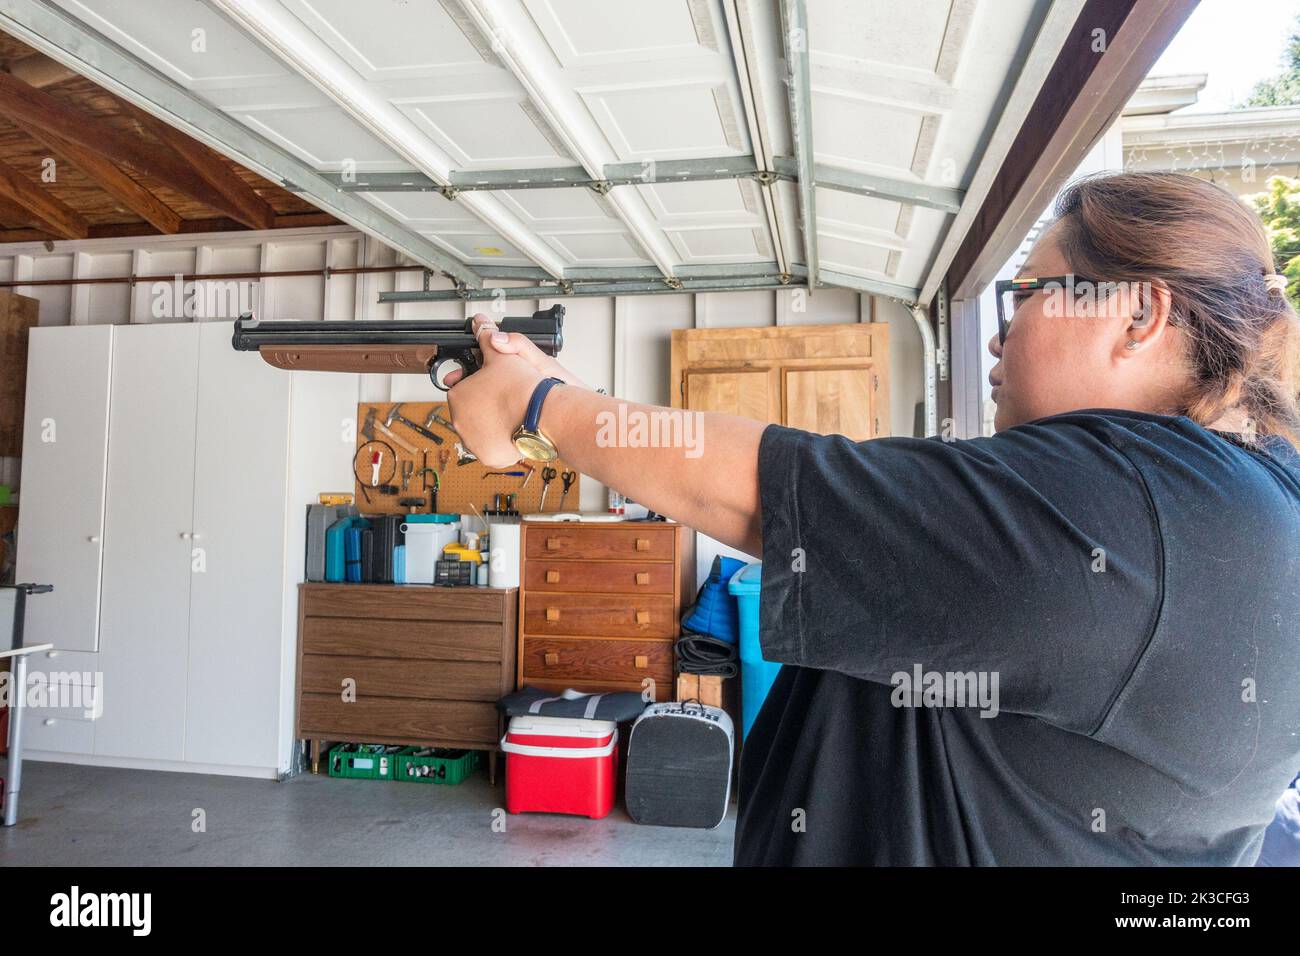 A woman aiming and shooting an air pistol in a garage. Stock Photo